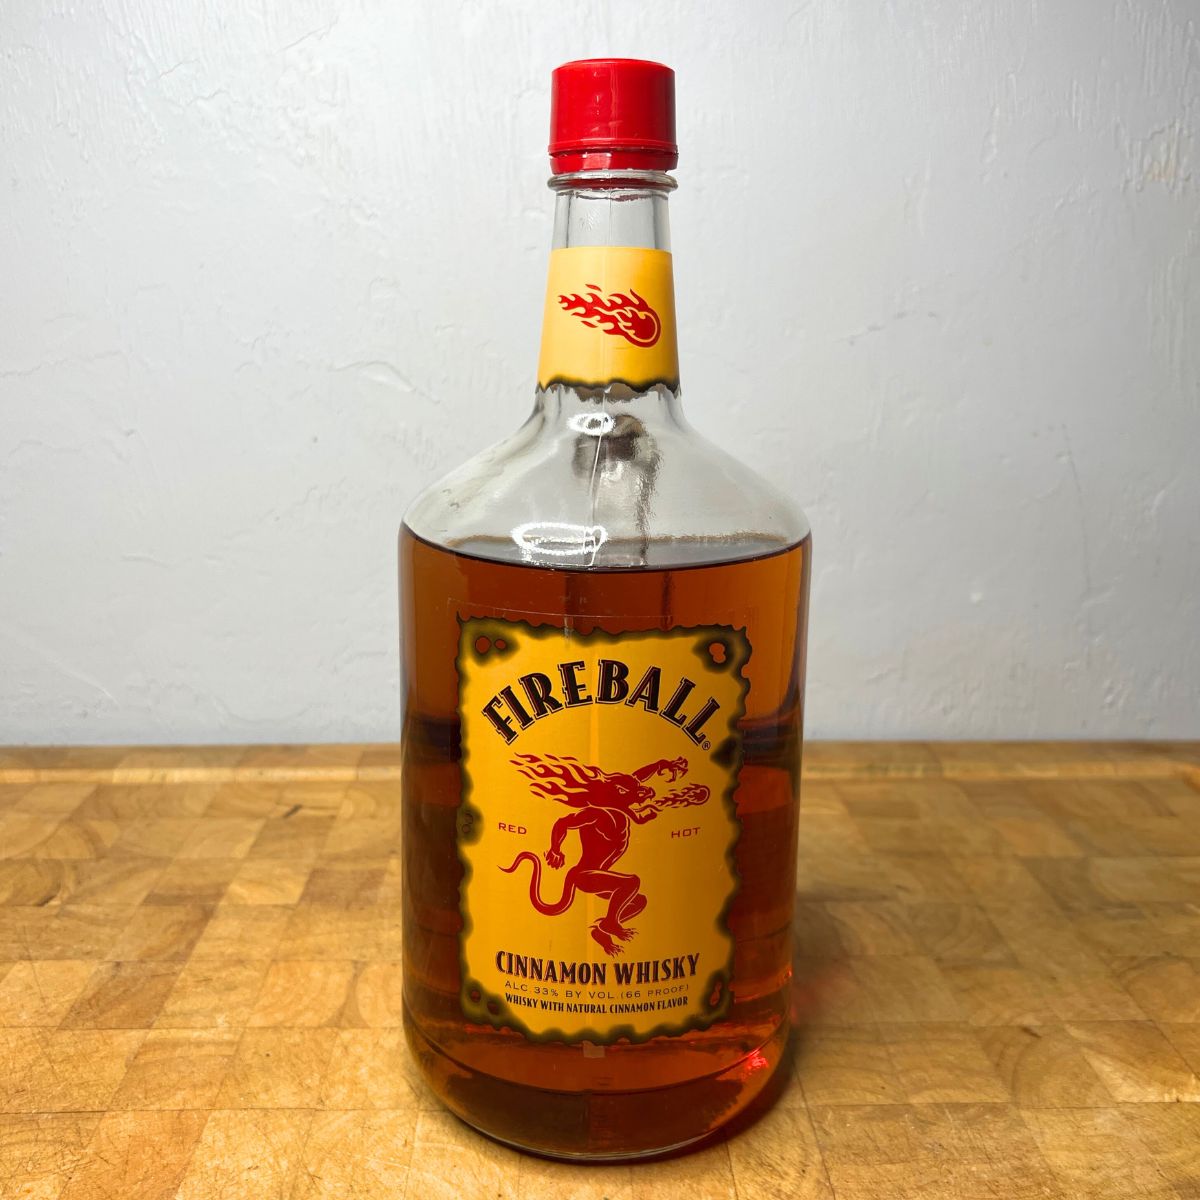 Bottle of Fireball on a table.